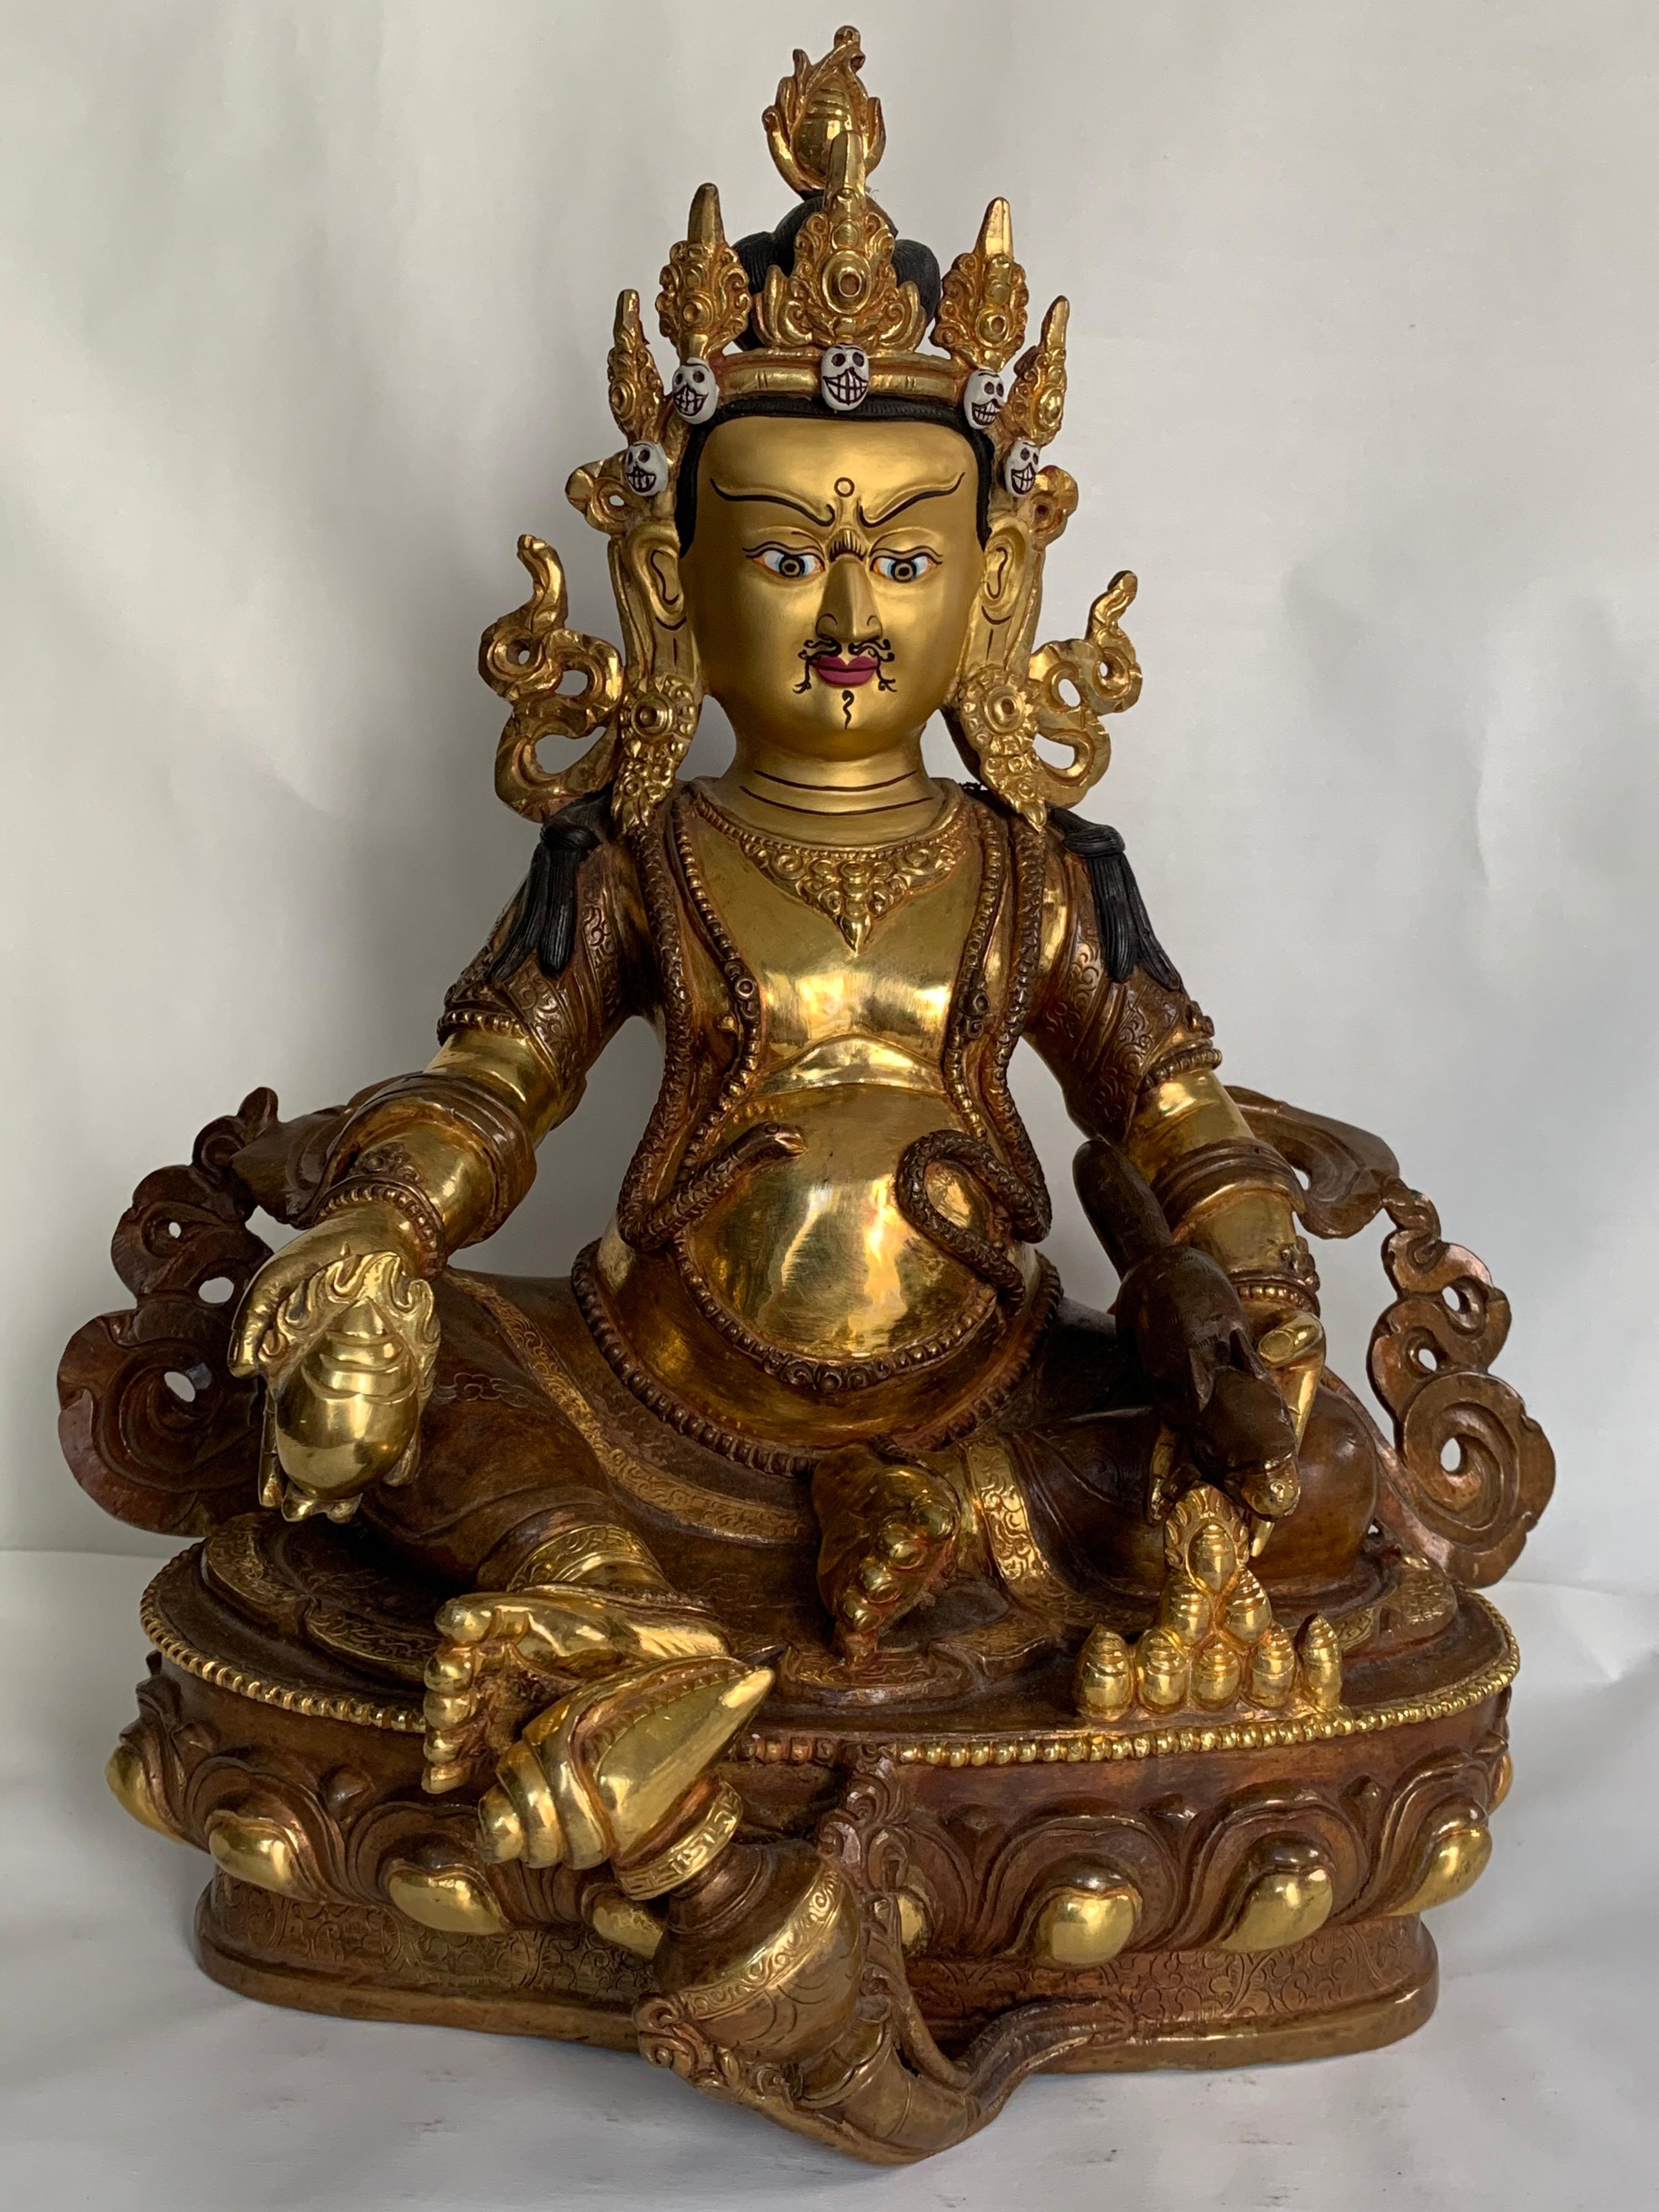 Unknown Figurative Sculpture - Kubera Statue 12 Inch with 24K Gold Handcrafted by Lost Wax Process